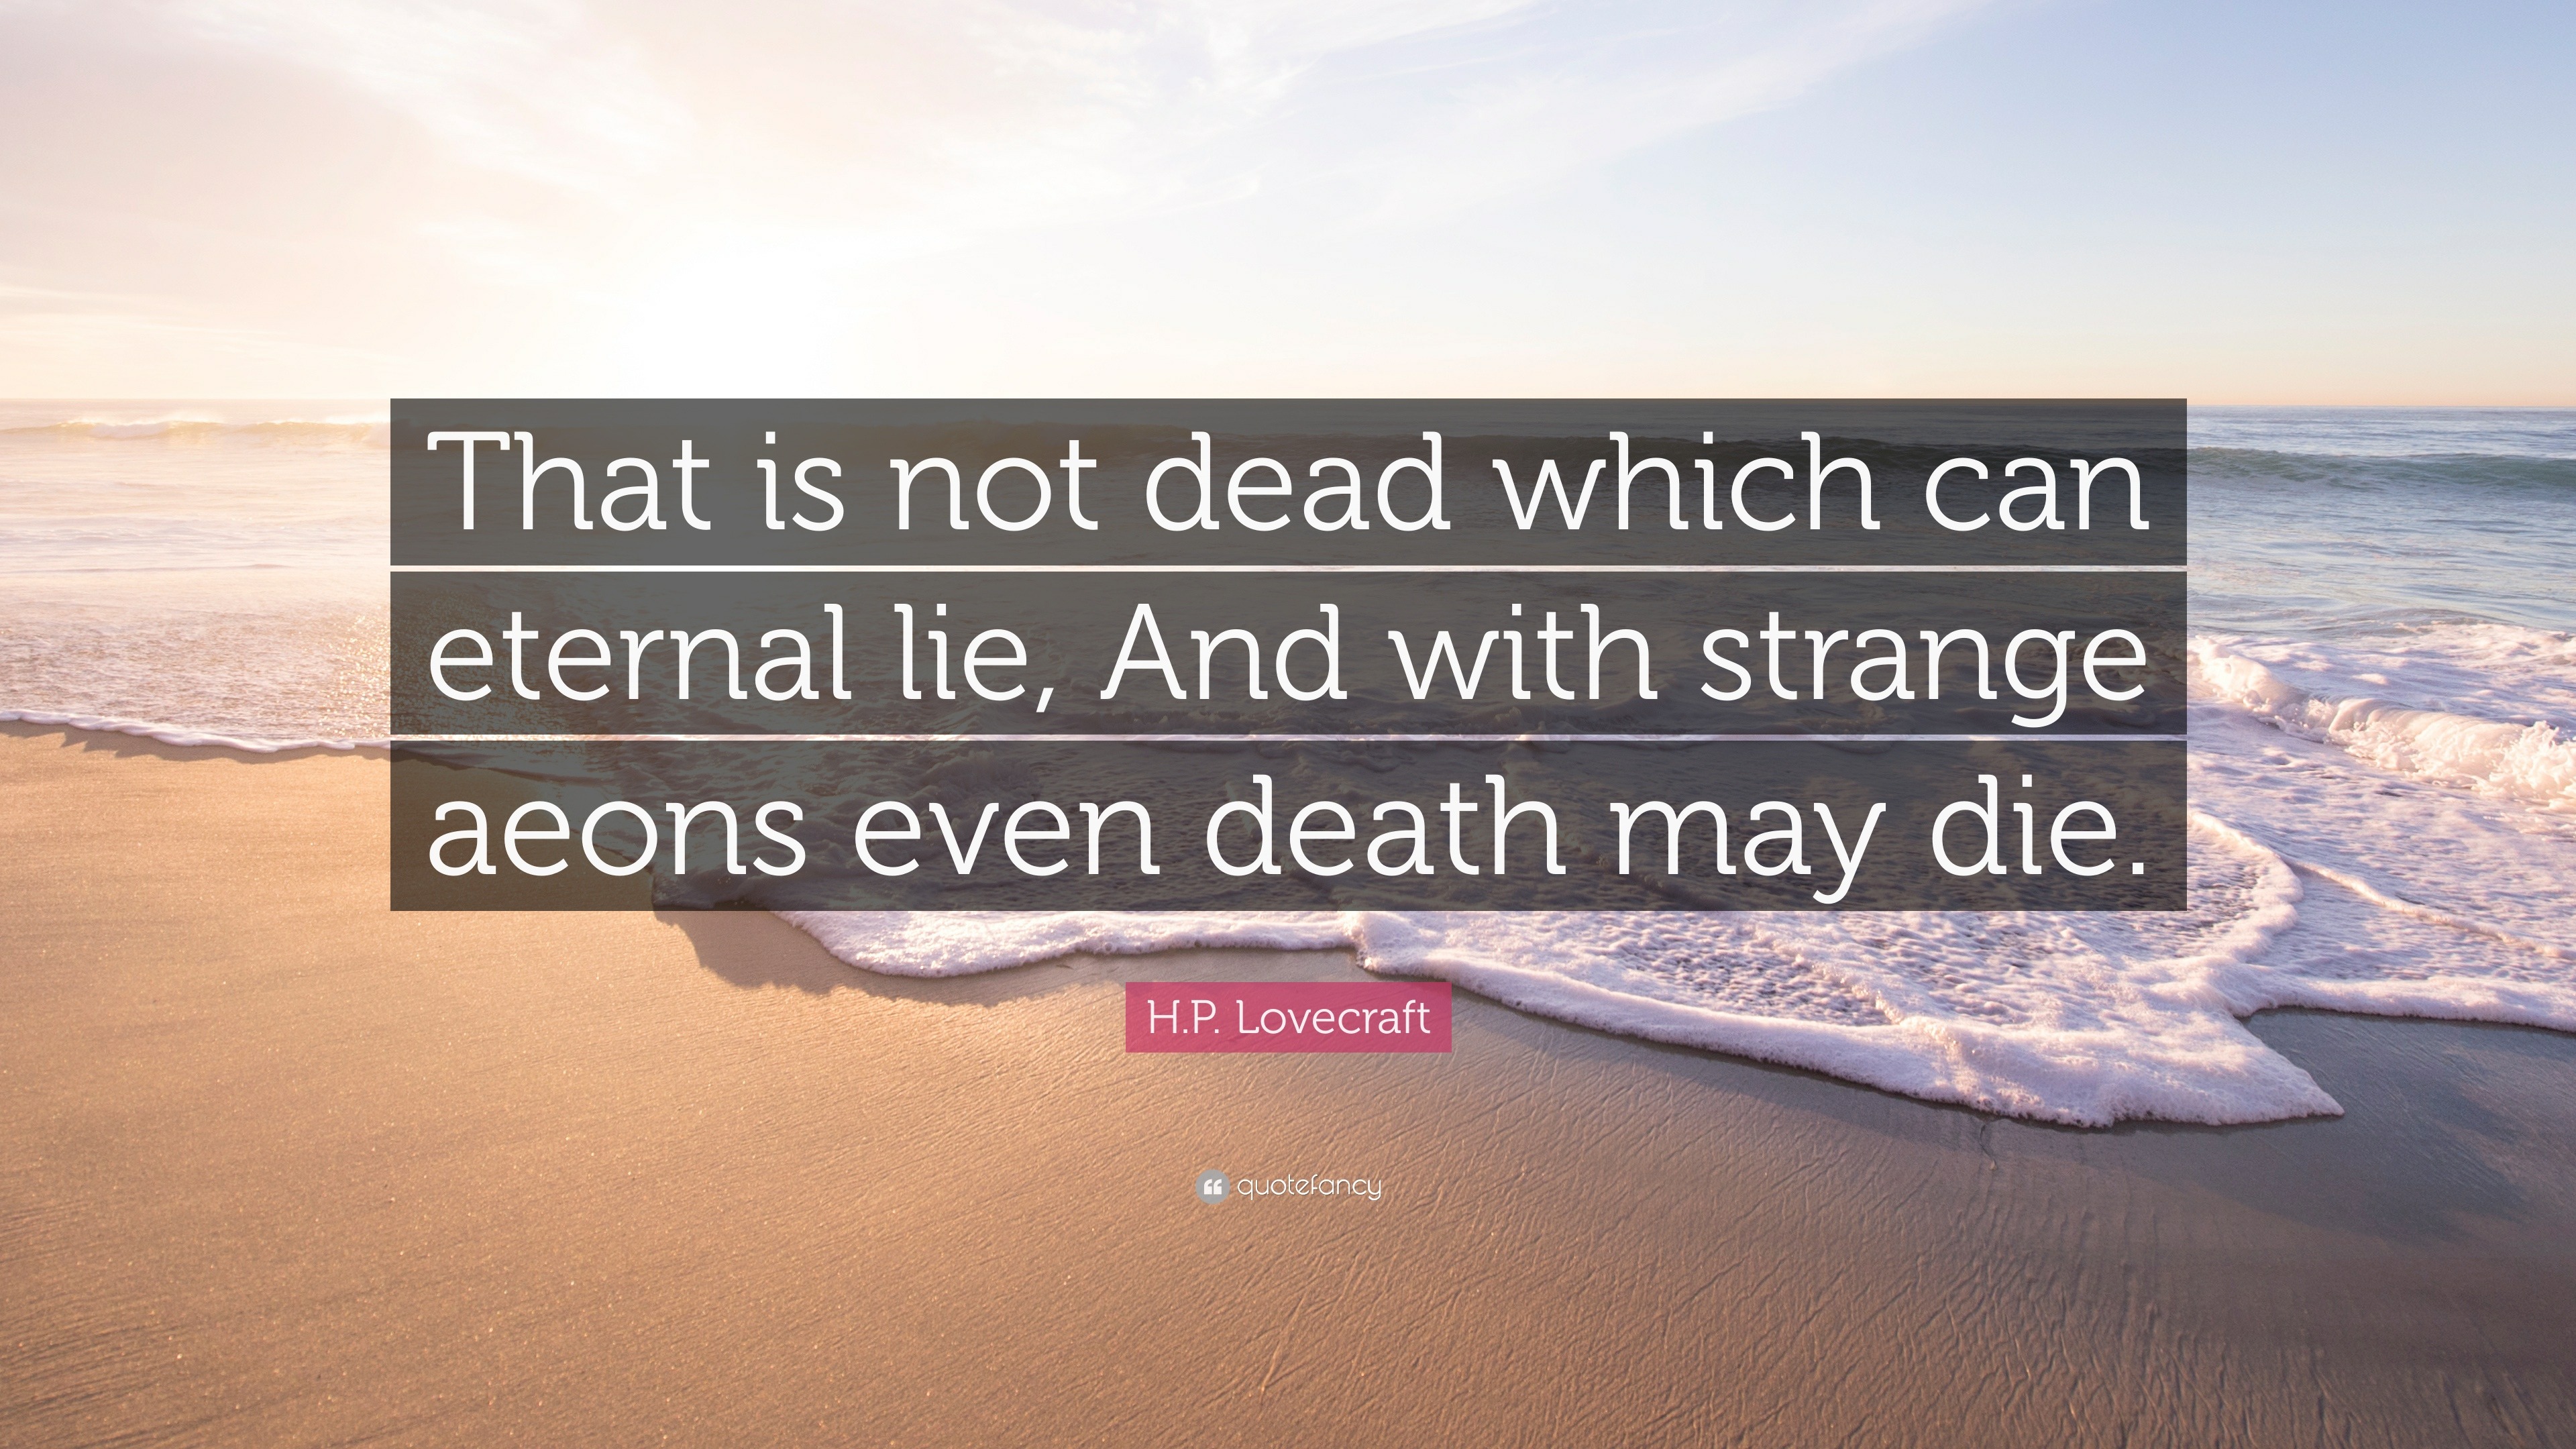 H.P. Lovecraft Quote: “That is not dead which can eternal lie, And with